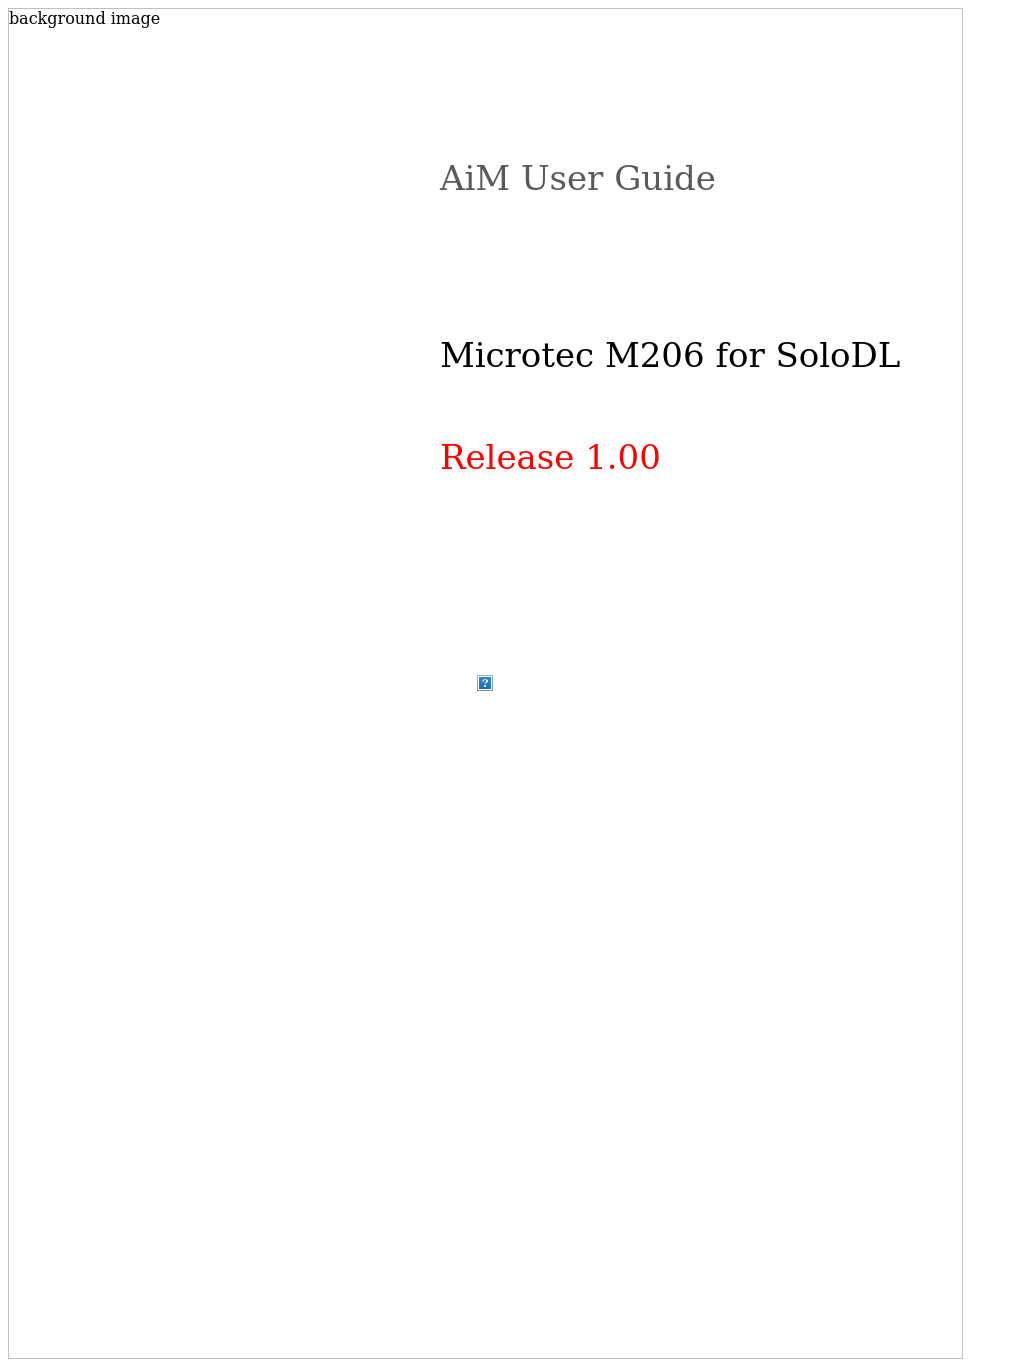 Microtec M206 for SoloDL